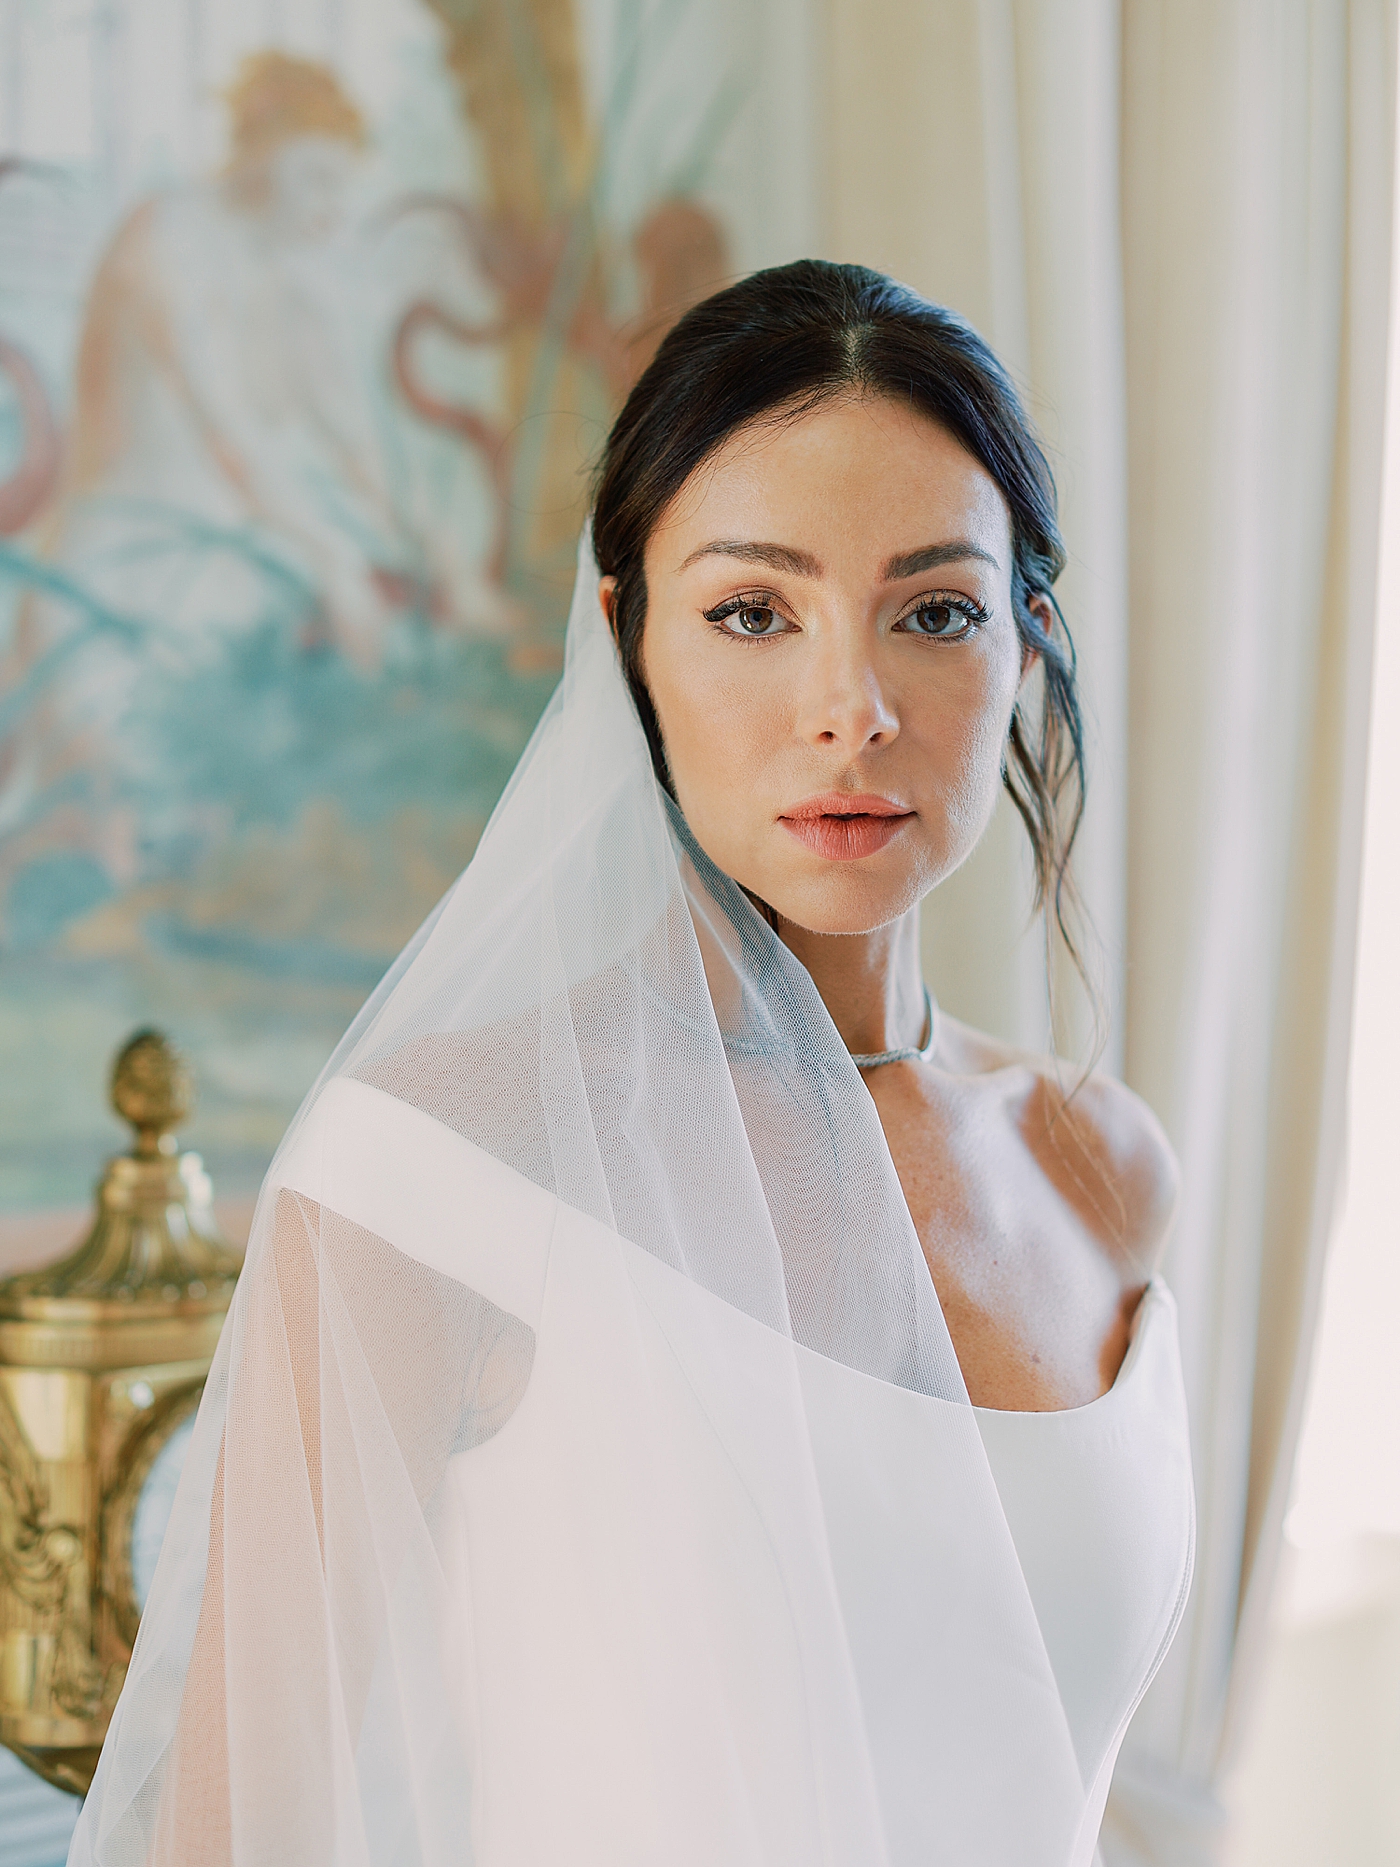 Portrait of a bride with an off the shoulder dress and veil | Image by Diane Sotero Photography